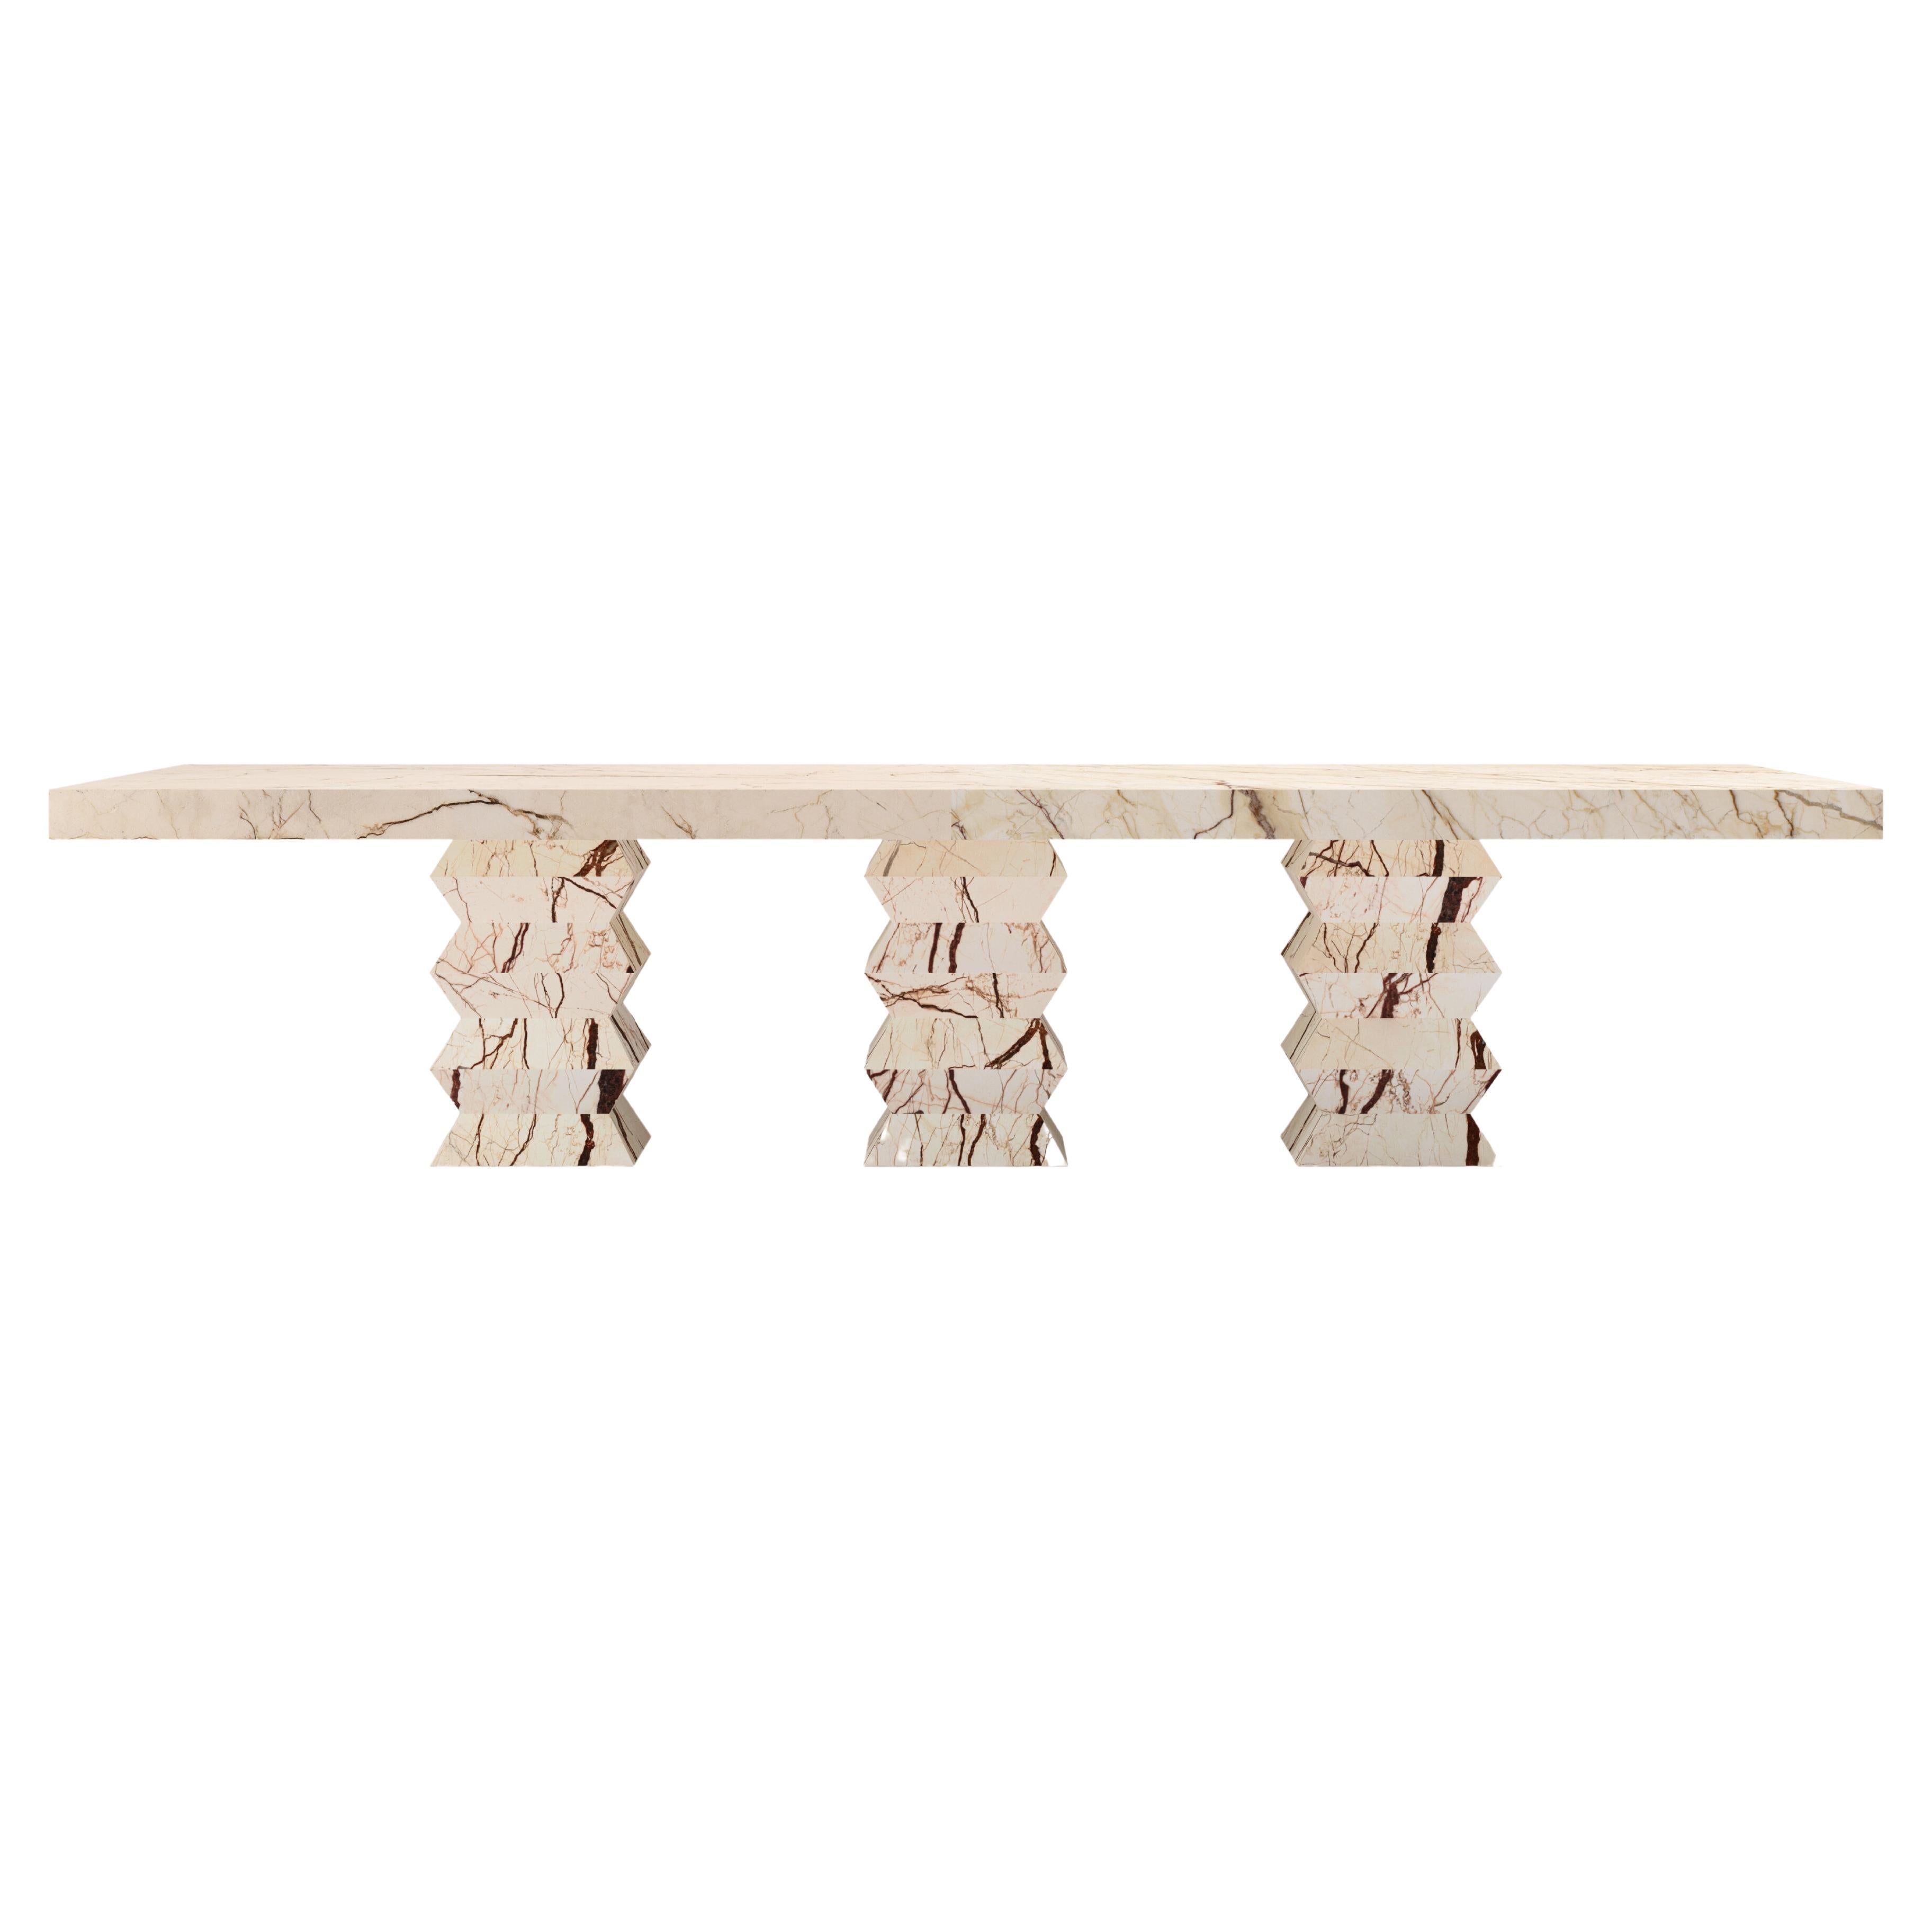 FORM(LA) Grinza Rectangle Dining Table 144"L x 48"W x 32"H Sofita Beige Marble For Sale